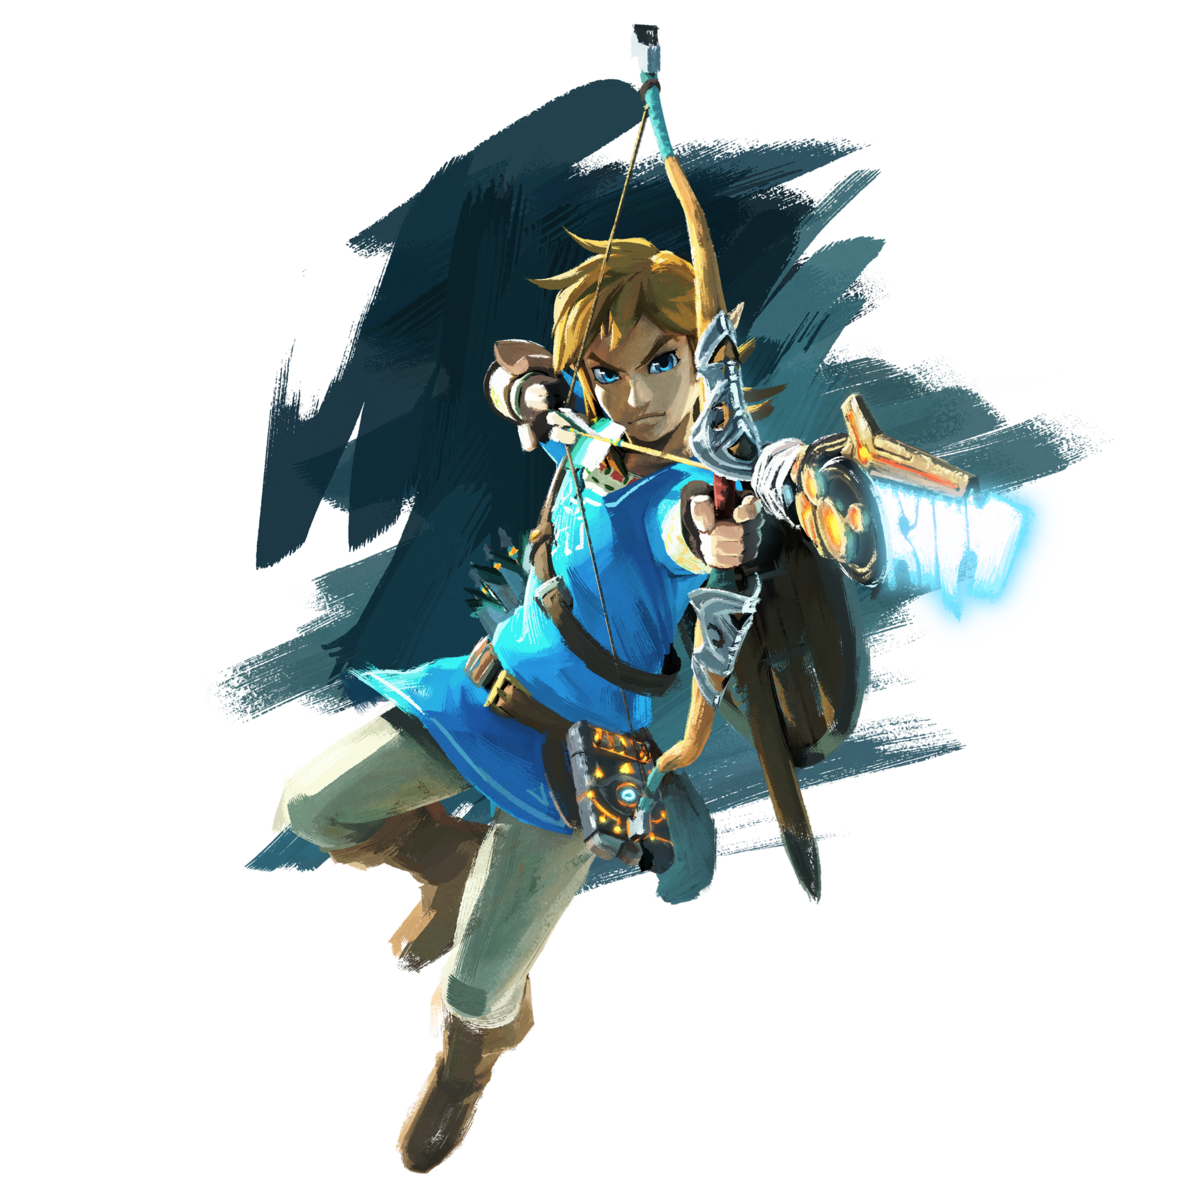 Link from 'The Legend of Zelda: Breath of the Wild' with a bow and arrow, not the 'BOTW' Twilight Bow, however